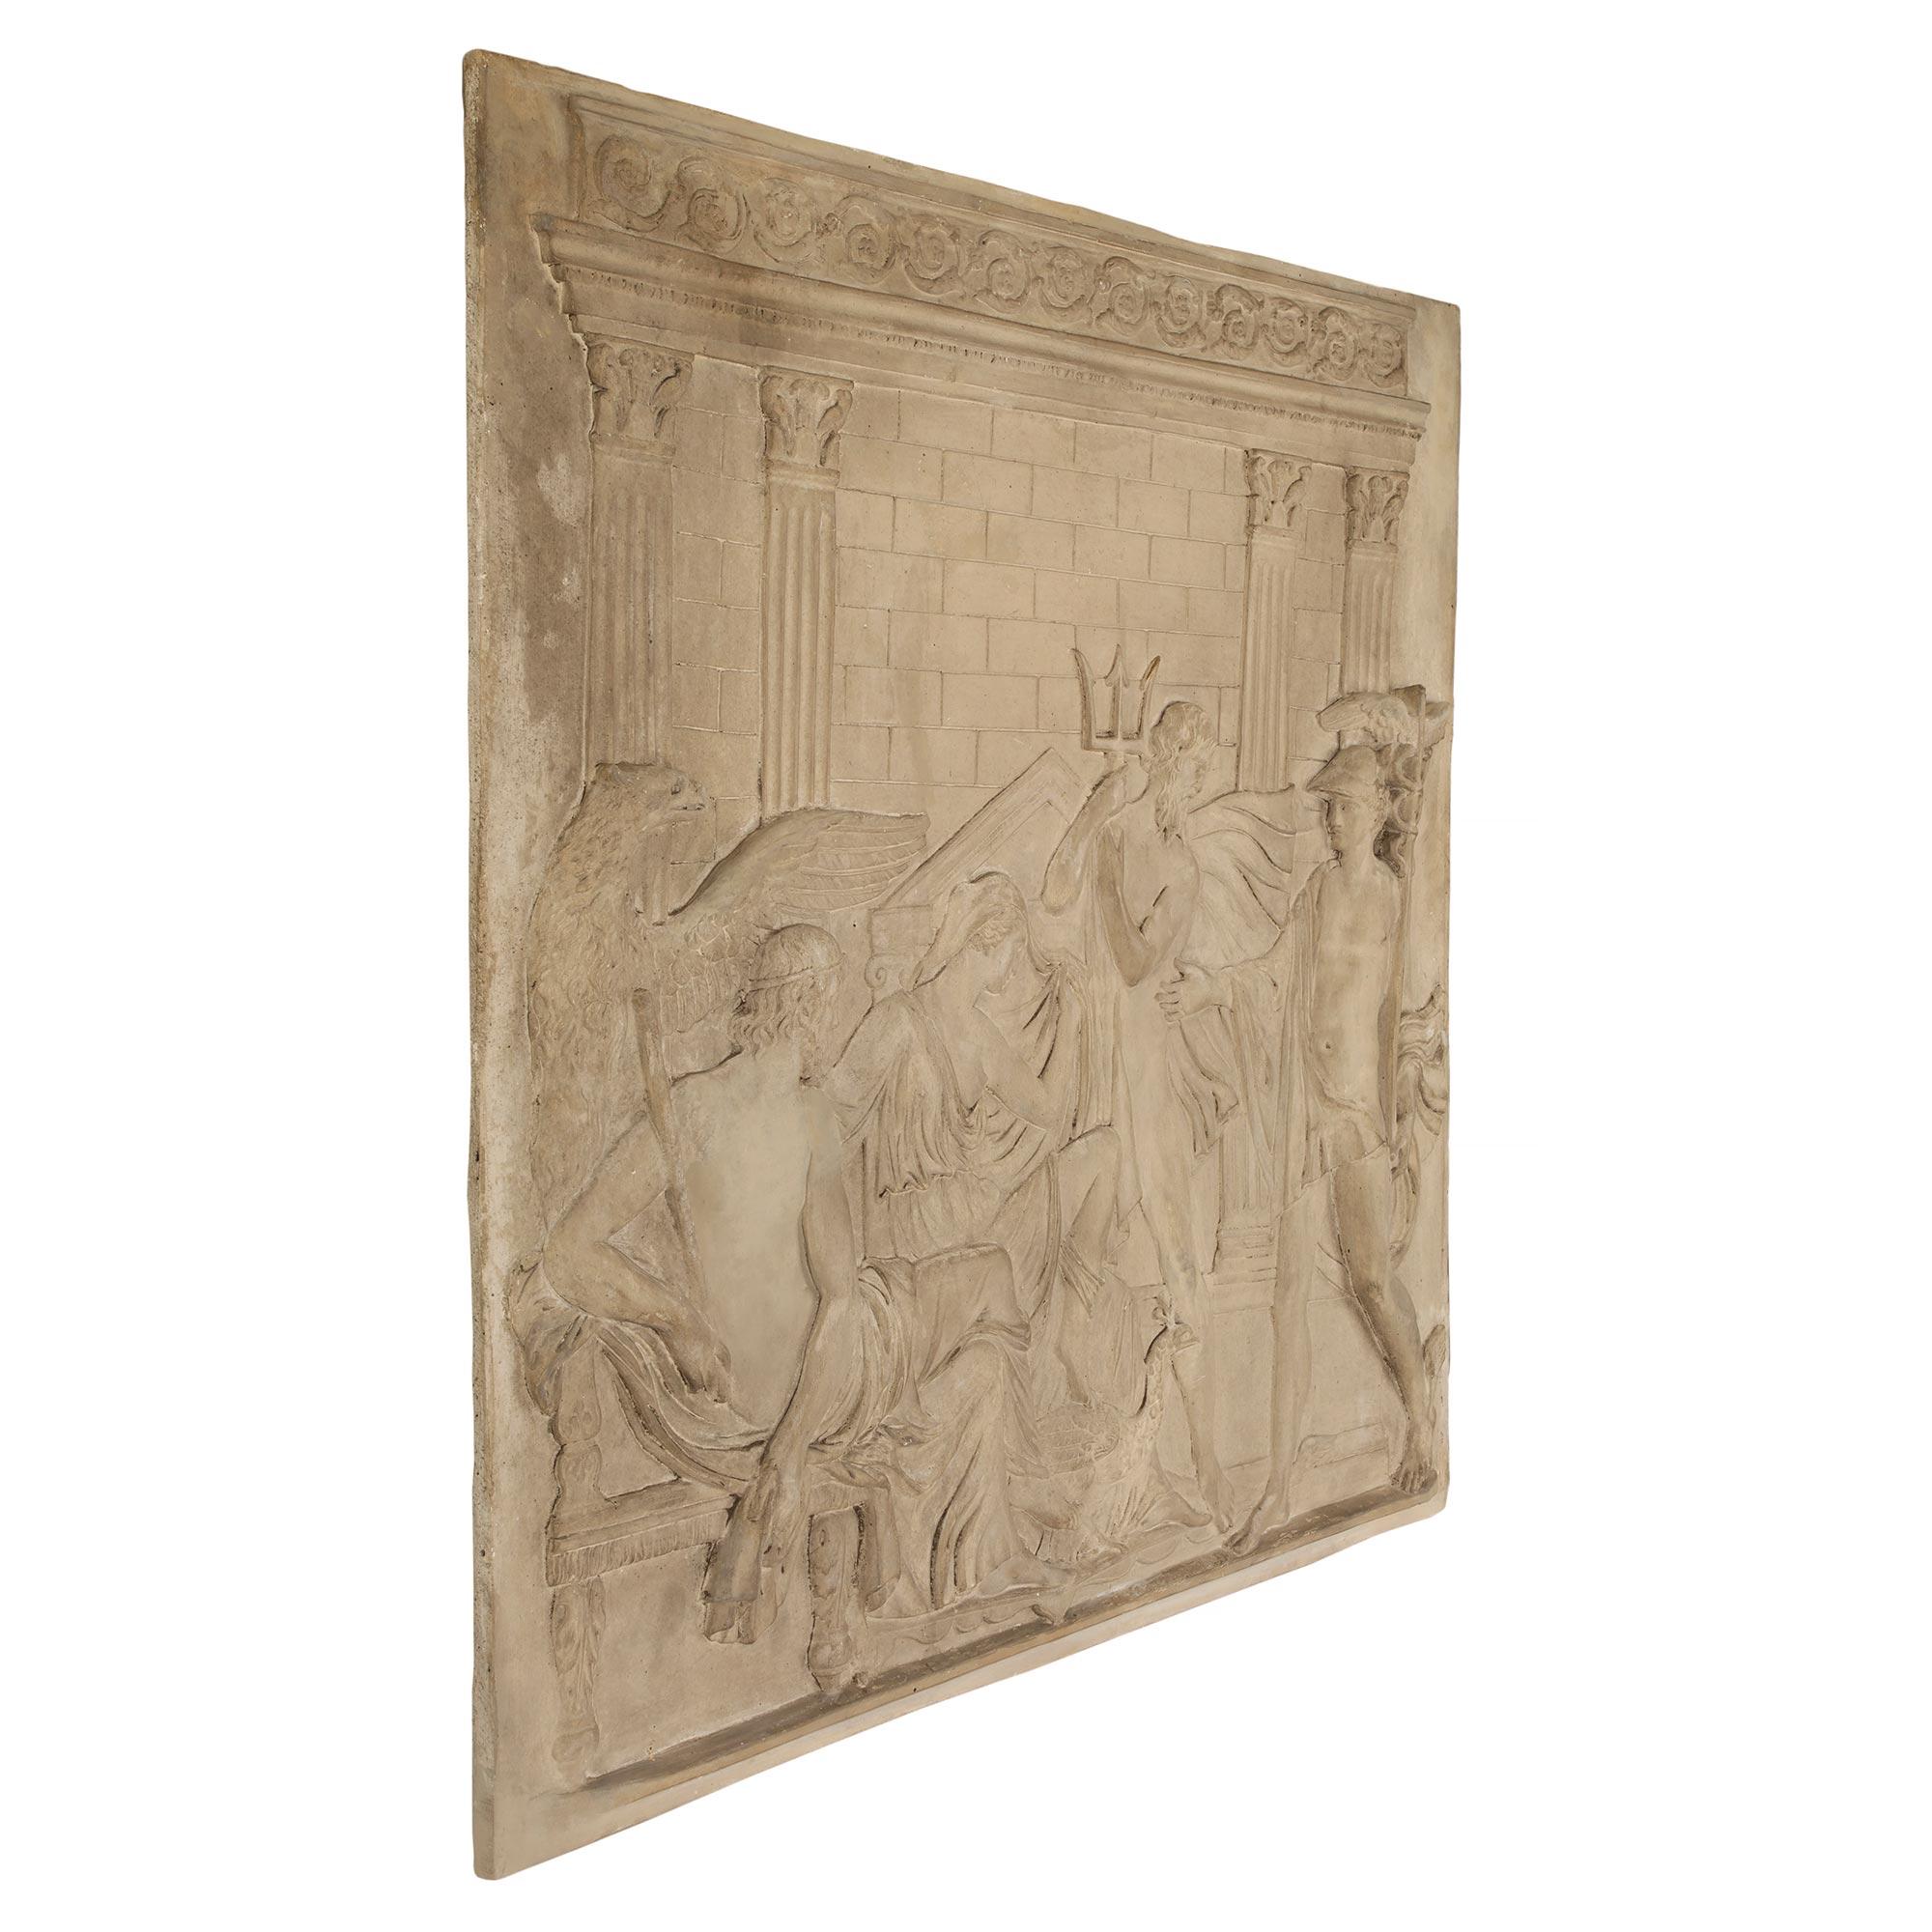 An exceptional French 19th century Neo-Classical st. plaster plaque. This extremely elegant and most decorative Parisian wall decor depicts a grouping of Mythological figures and Gods. At the center is Poseidon holding his trident while to the right